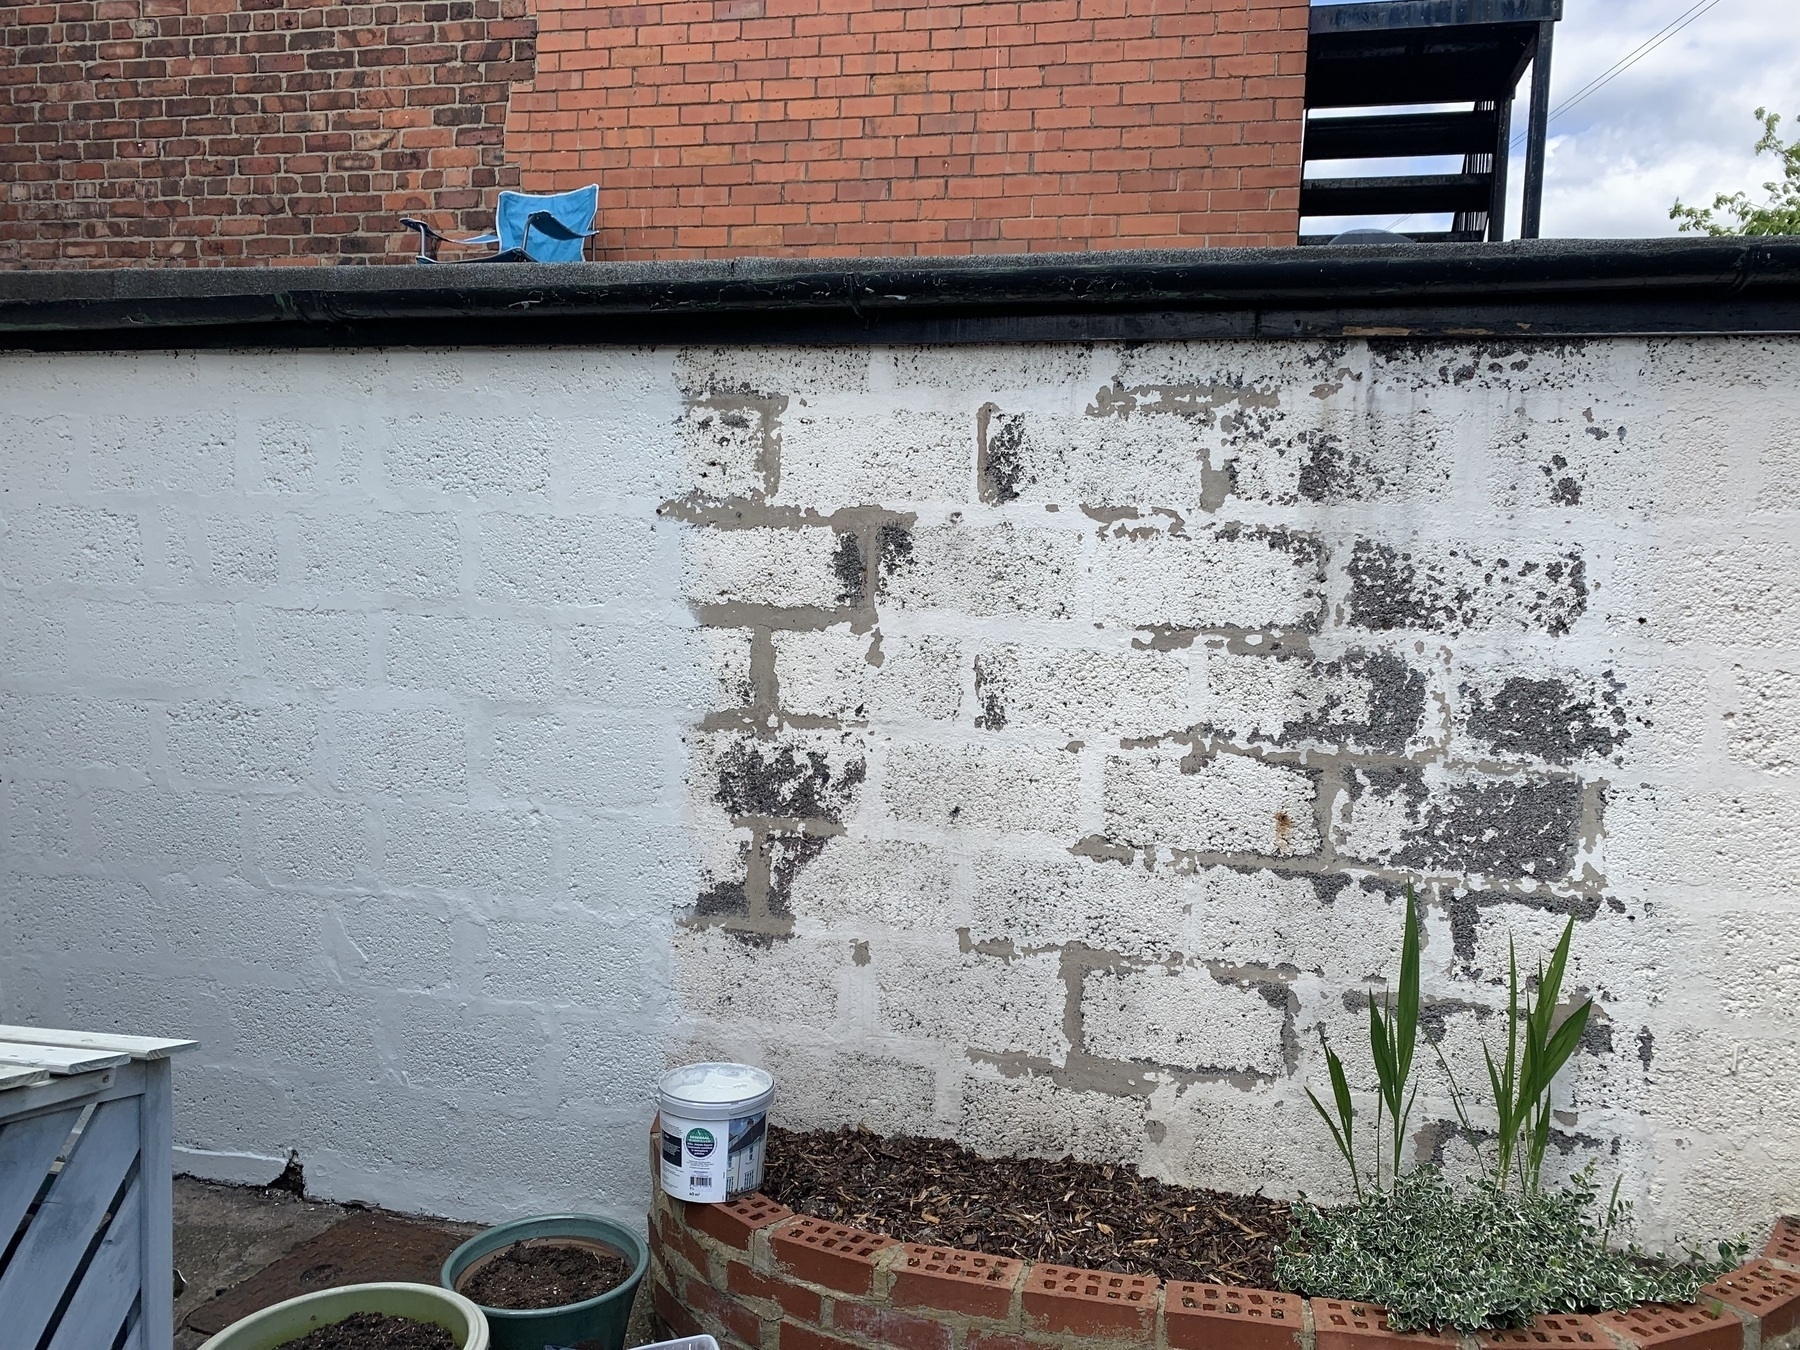 External breeze block wall with flaking paint and bare patches in the centre. Painting in progress from left to right with clear line marking done and not done. Open paint can in view on a low brick wall.